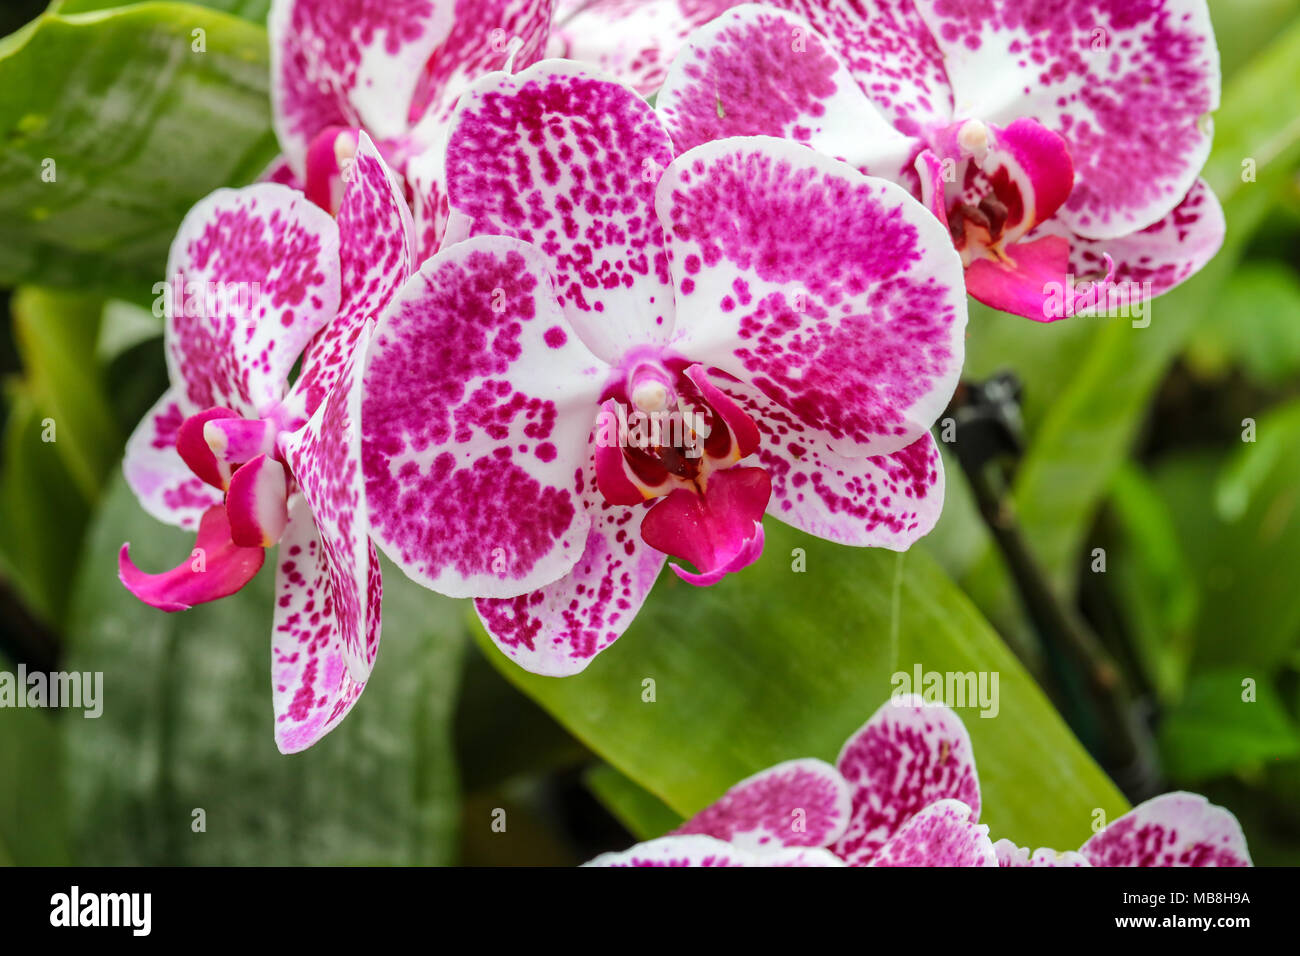 Beautiful mages of Orchids shot at Phipps Conservatory, intermixed with glass orchid sculptures. Stock Photo